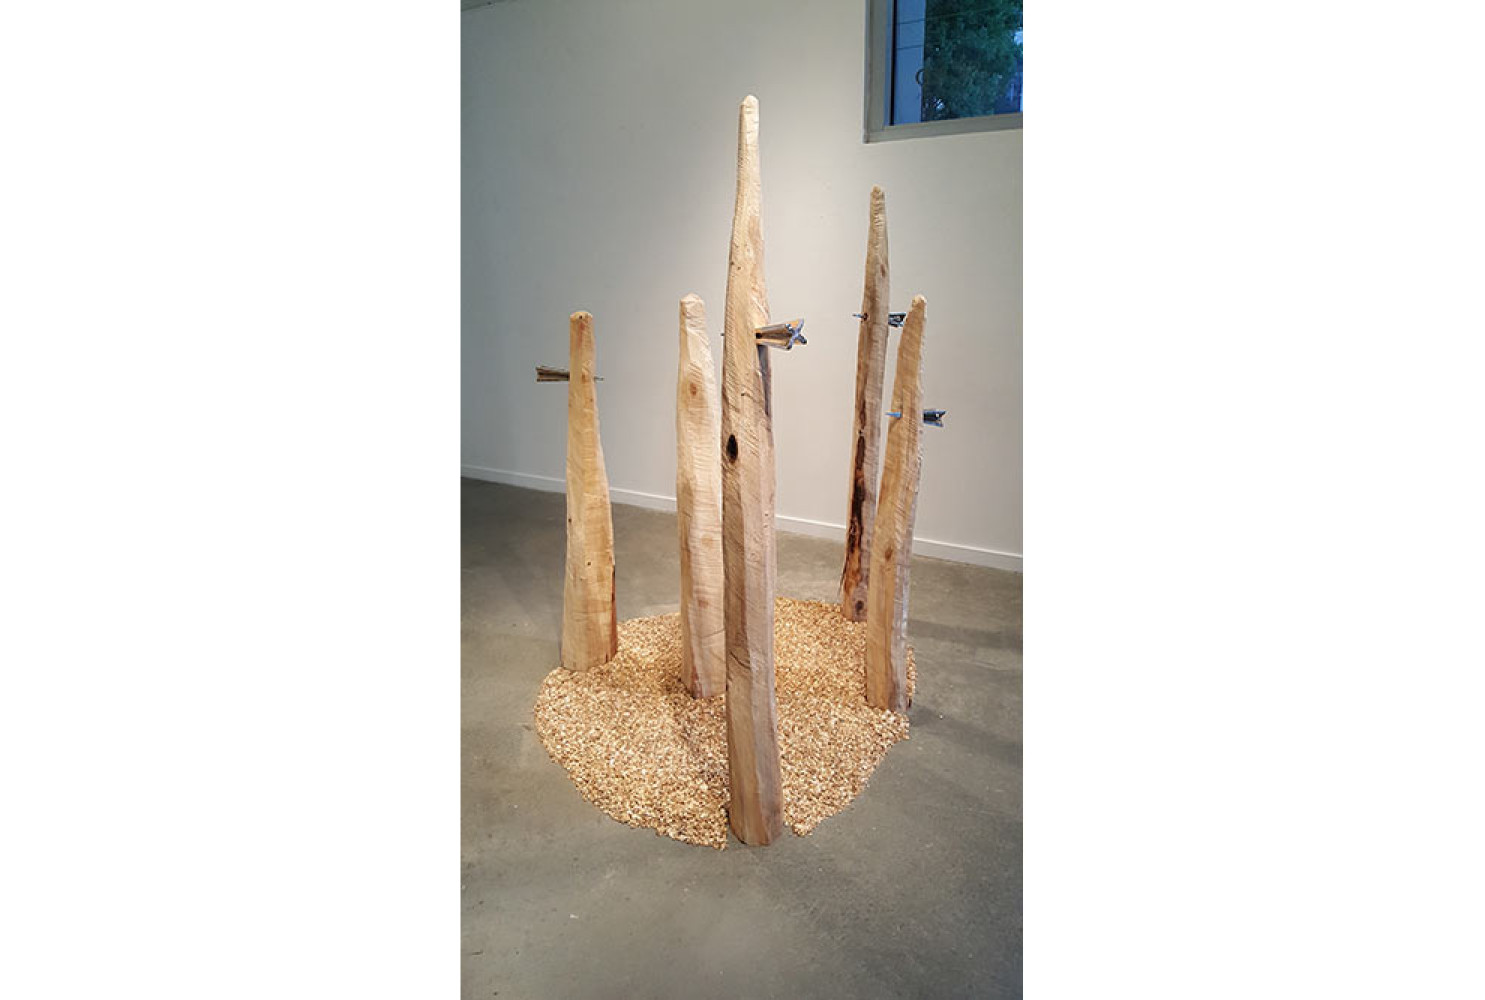 Protected, 2015, by Crowell A Pate IV; Poplar, bronze, stone; 75 x 75 x 78 inches; Courtesy of the artist.